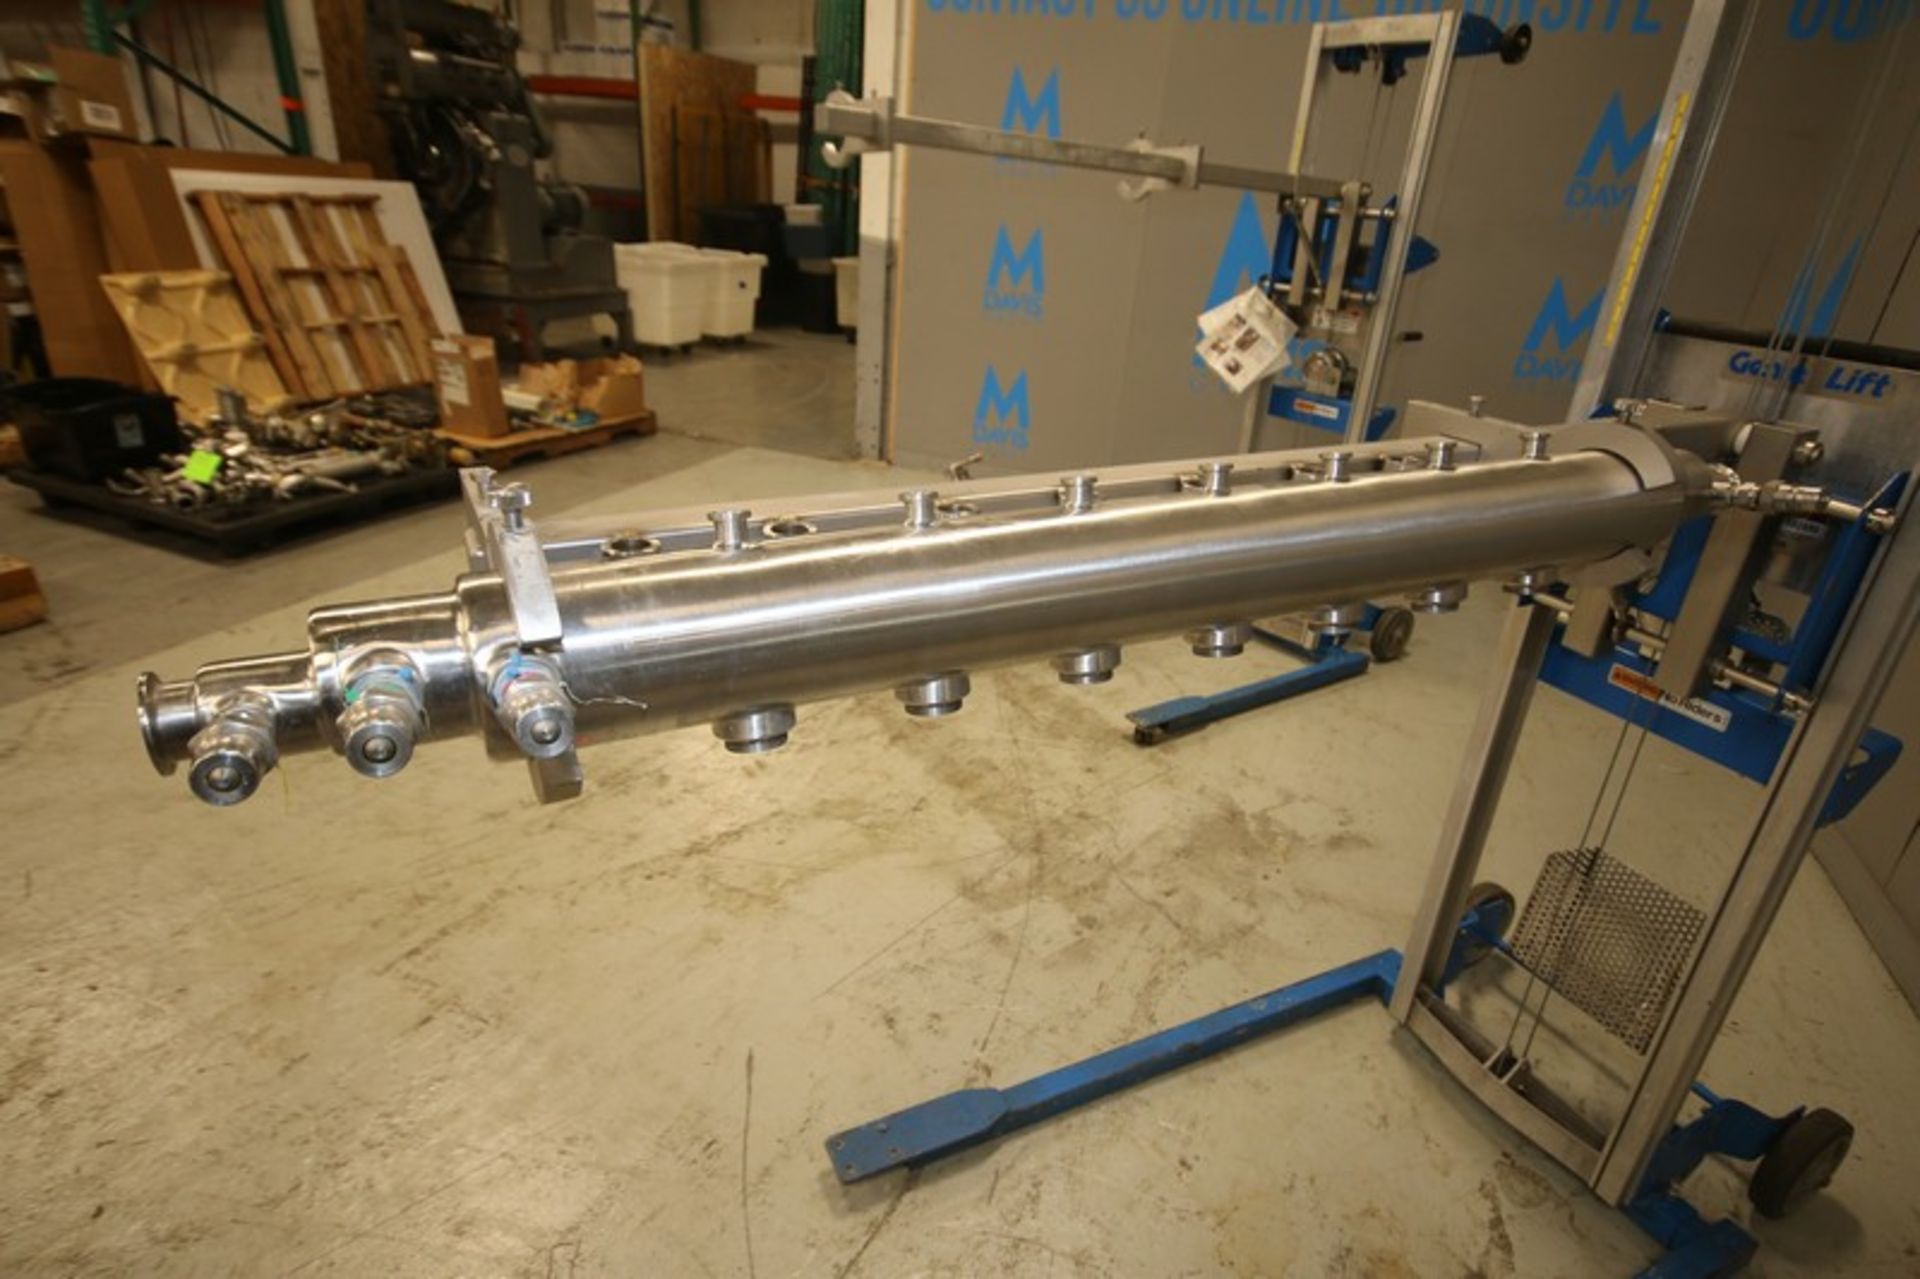 Bakery S/S Spray Manifold System, Includes 50"L x 4"W Jacketed S/S Manifold with 1.5" CT - Image 3 of 3